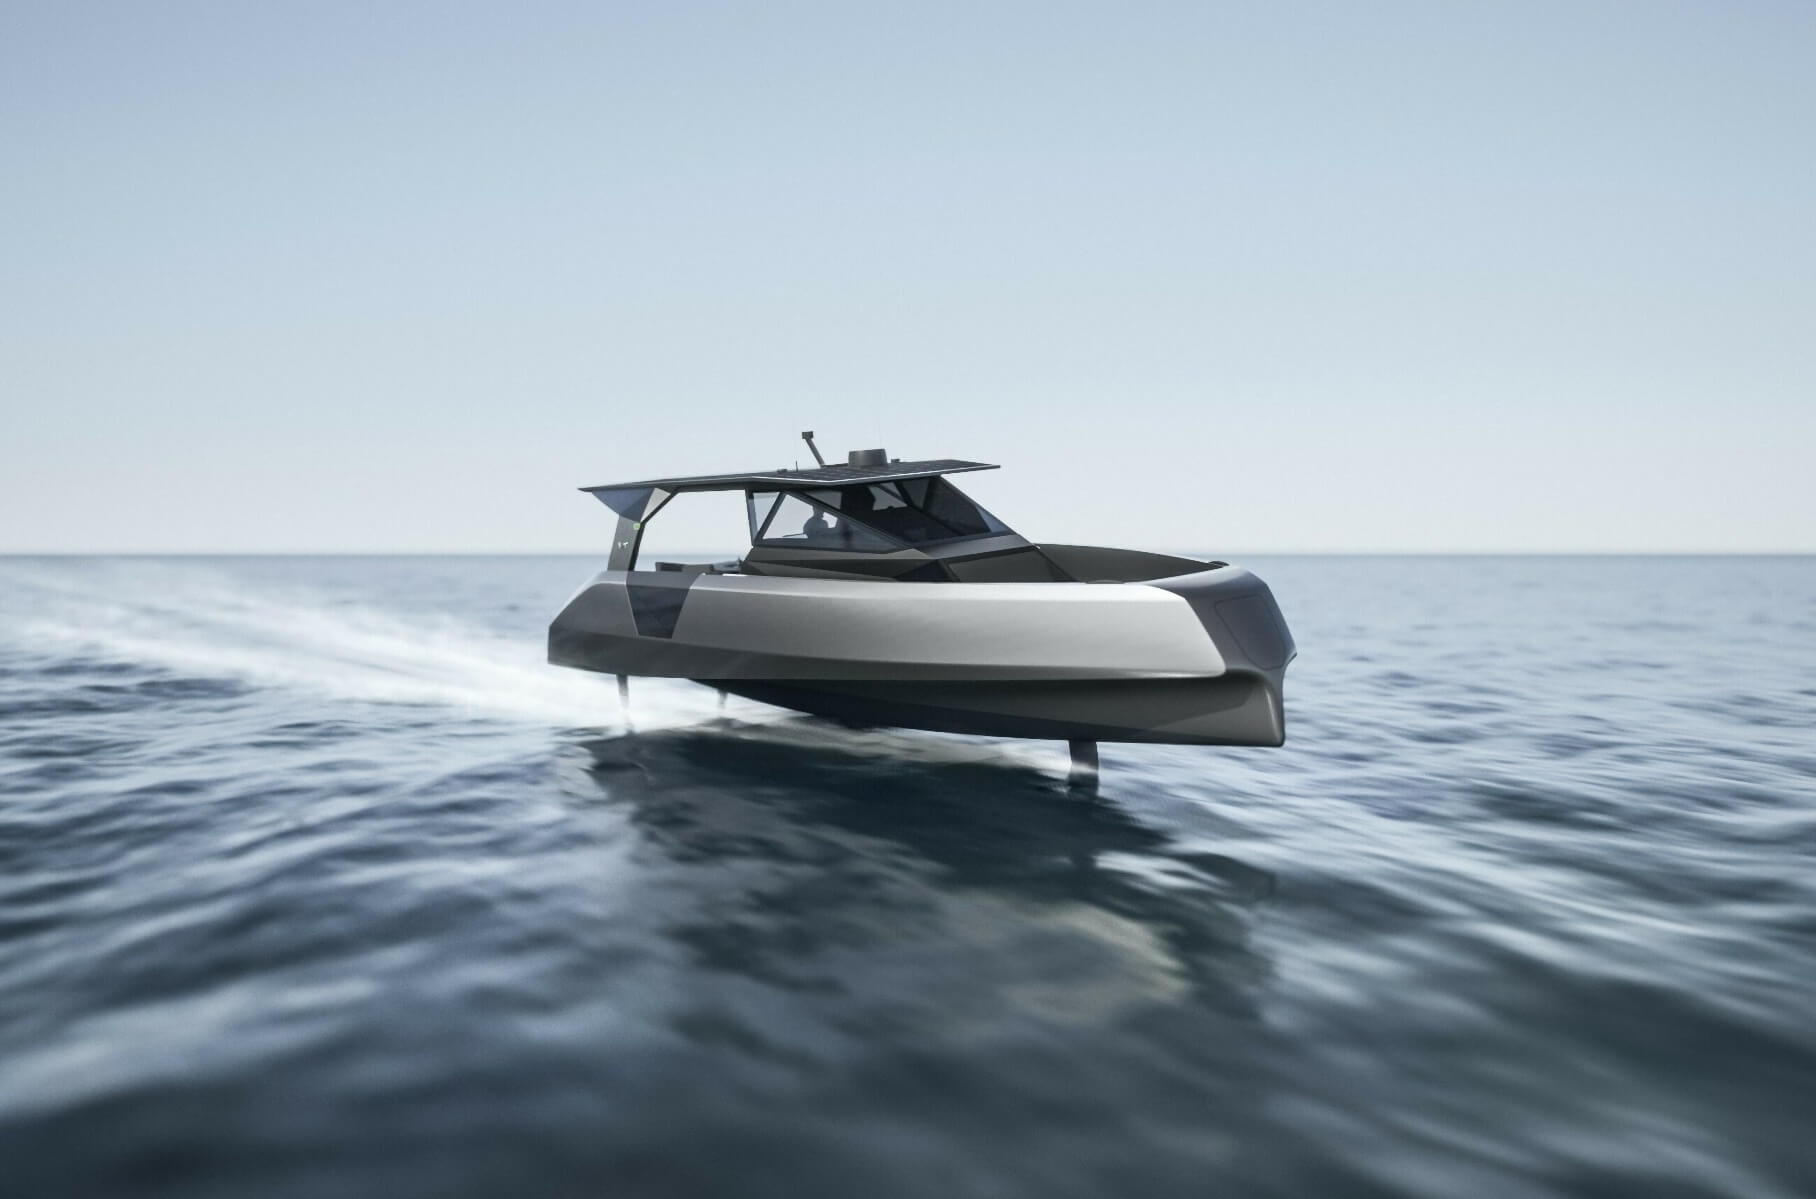 BMW will release the world's largest hydrofoil yacht